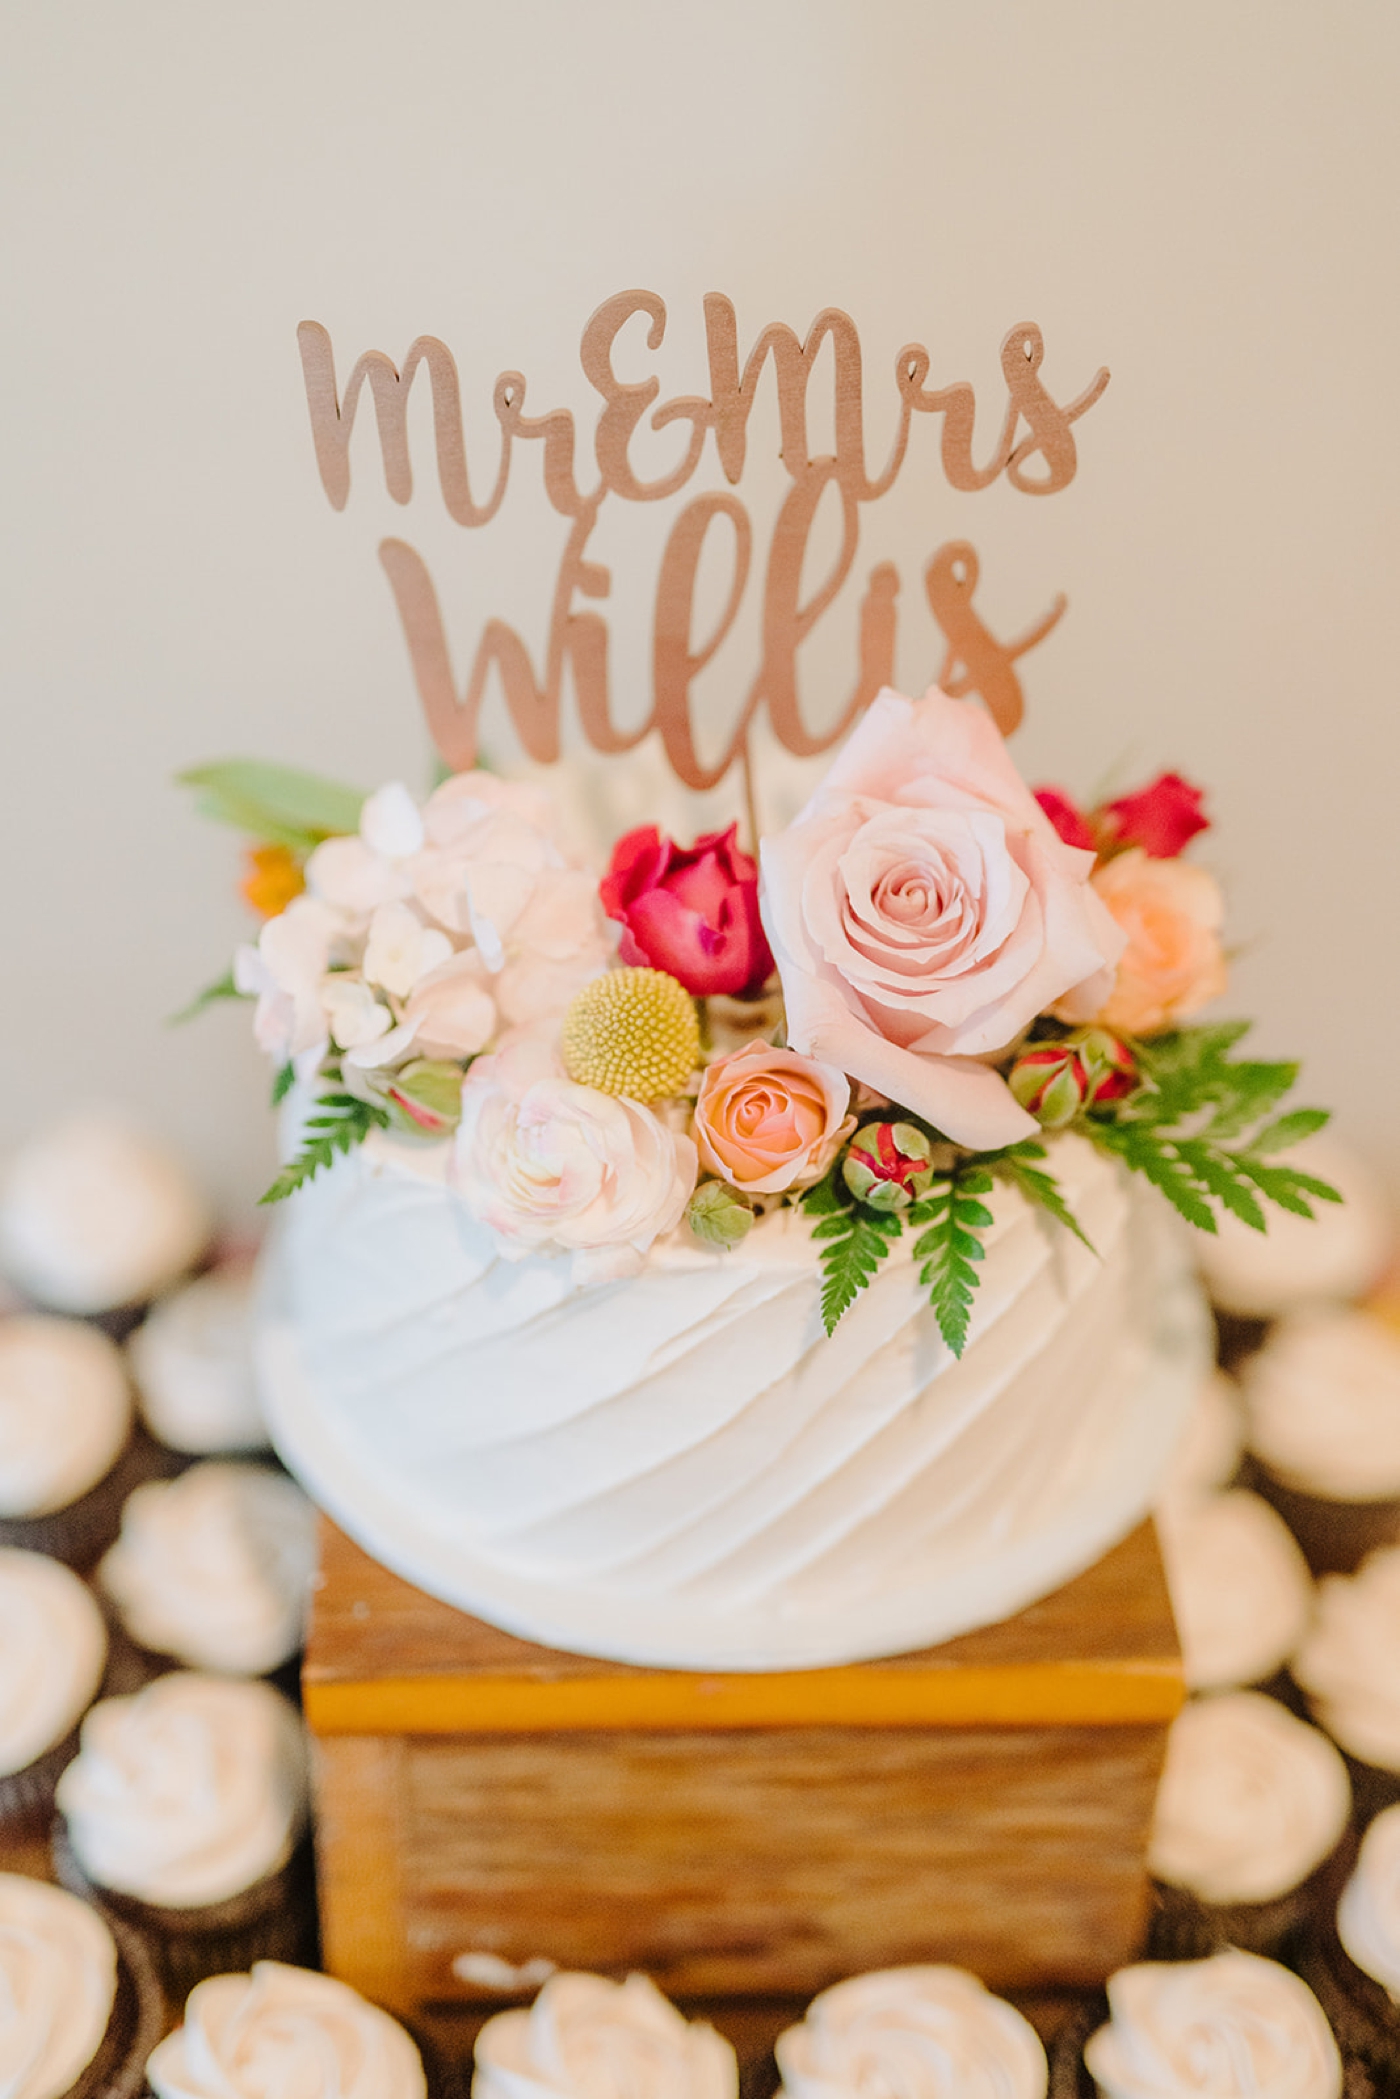 Spring wedding cake decorated with a rose gold topper, blush roses, and ferns